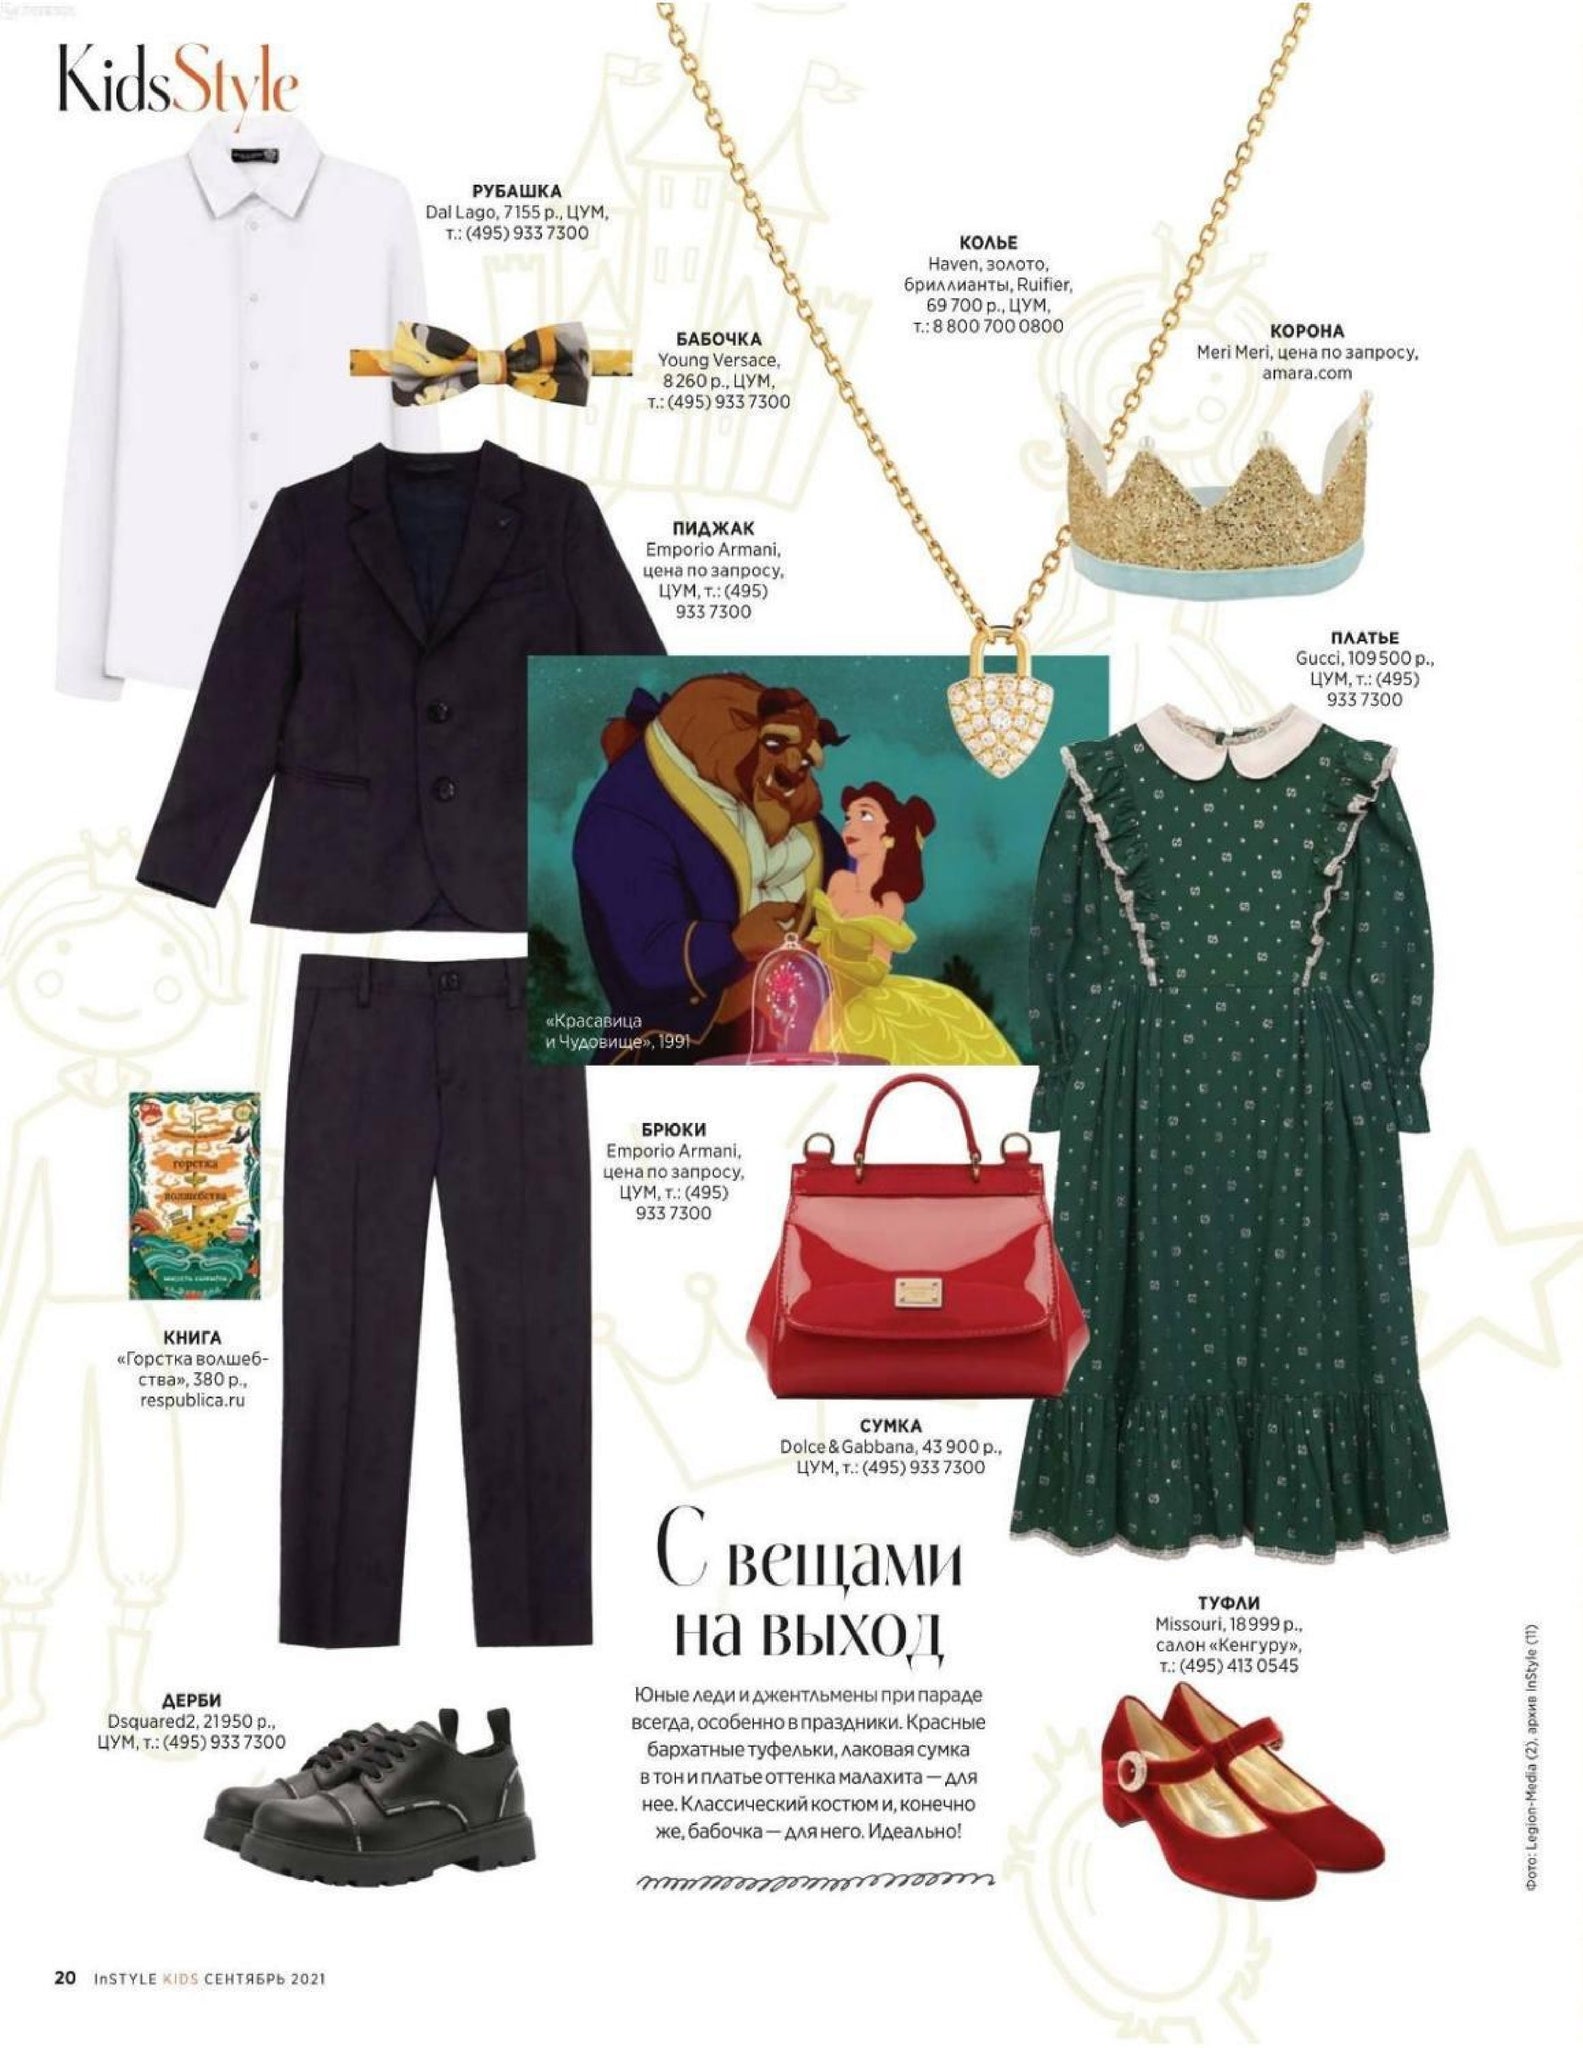 RUIFIER Haven Clarity Triad Necklace as seen in InStyle Magazine 